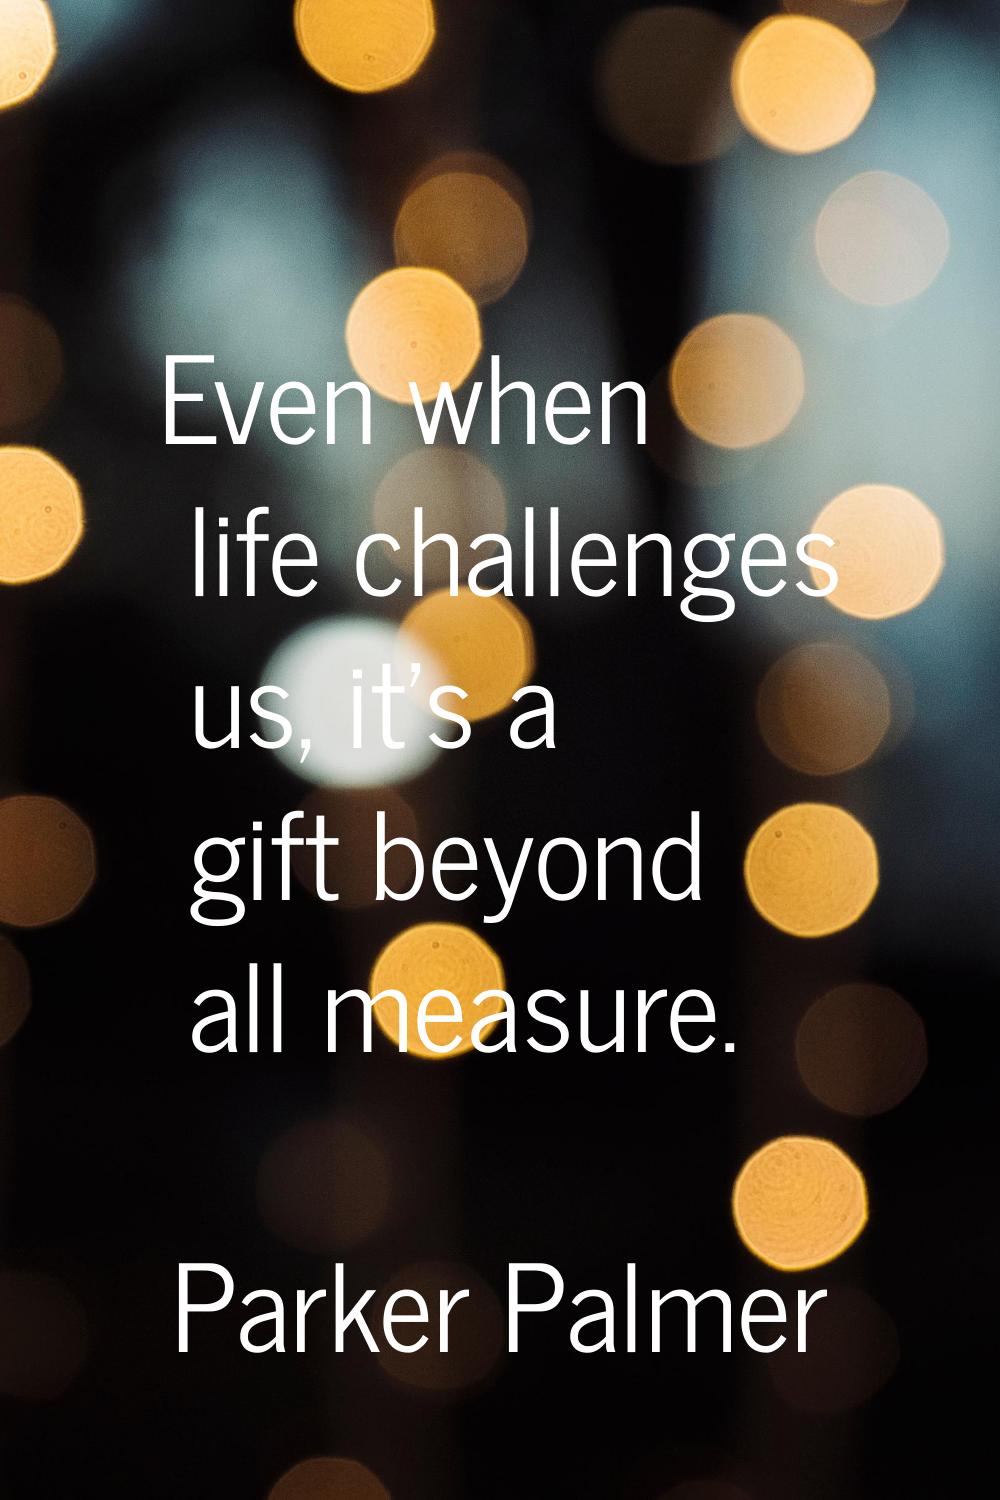 Even when life challenges us, it's a gift beyond all measure.